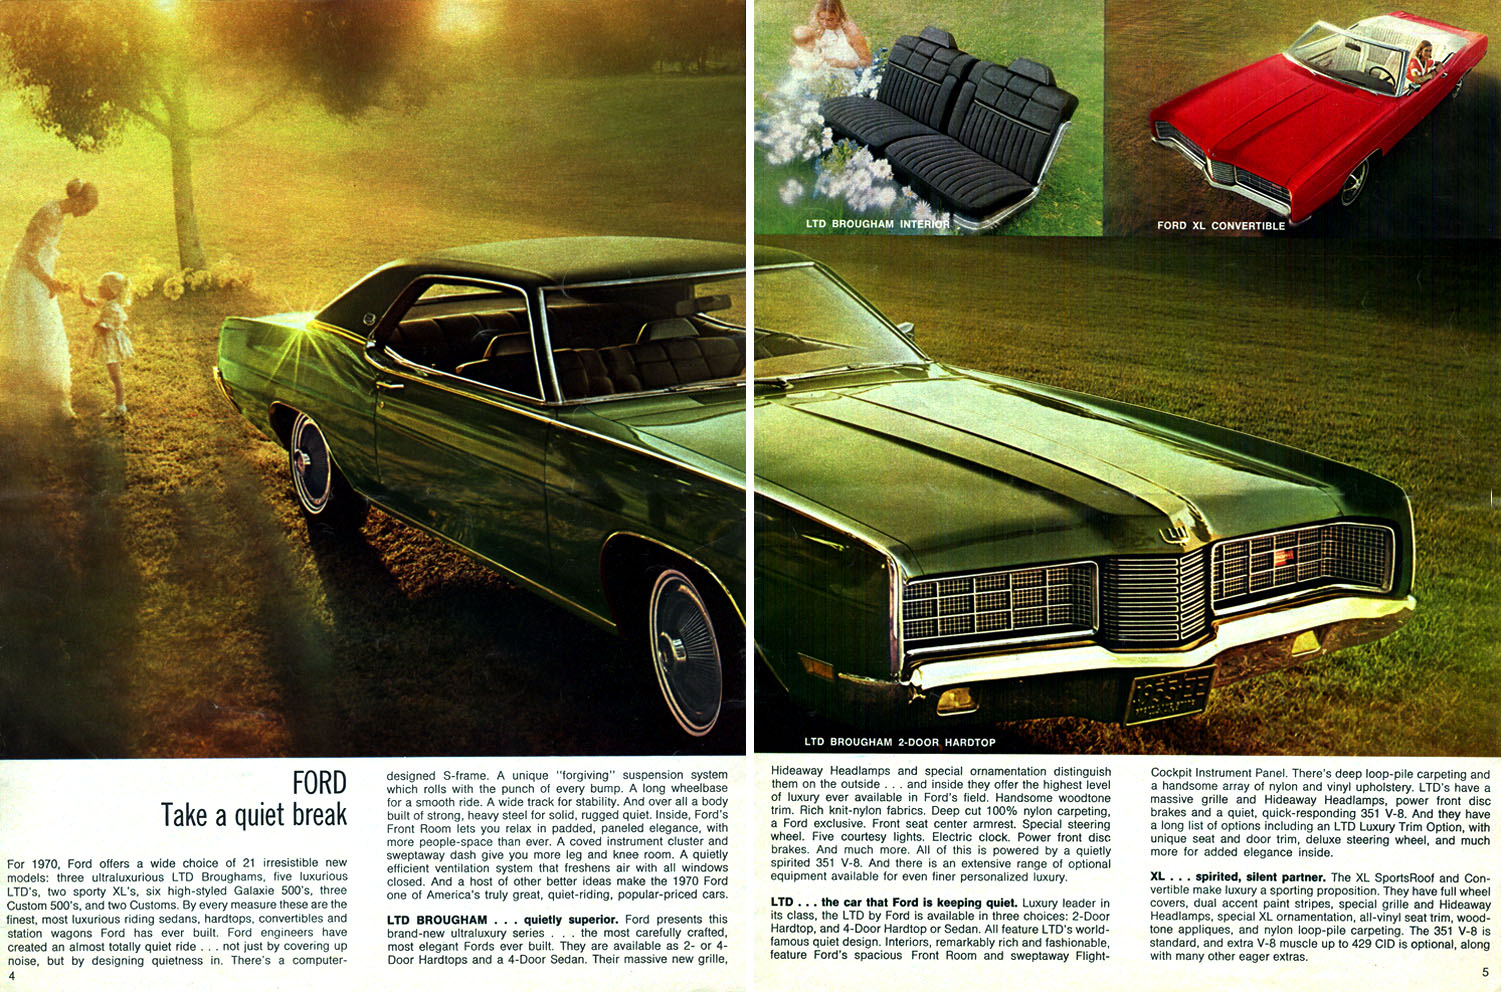 1970_Ford_Buyers_Digest-04-05